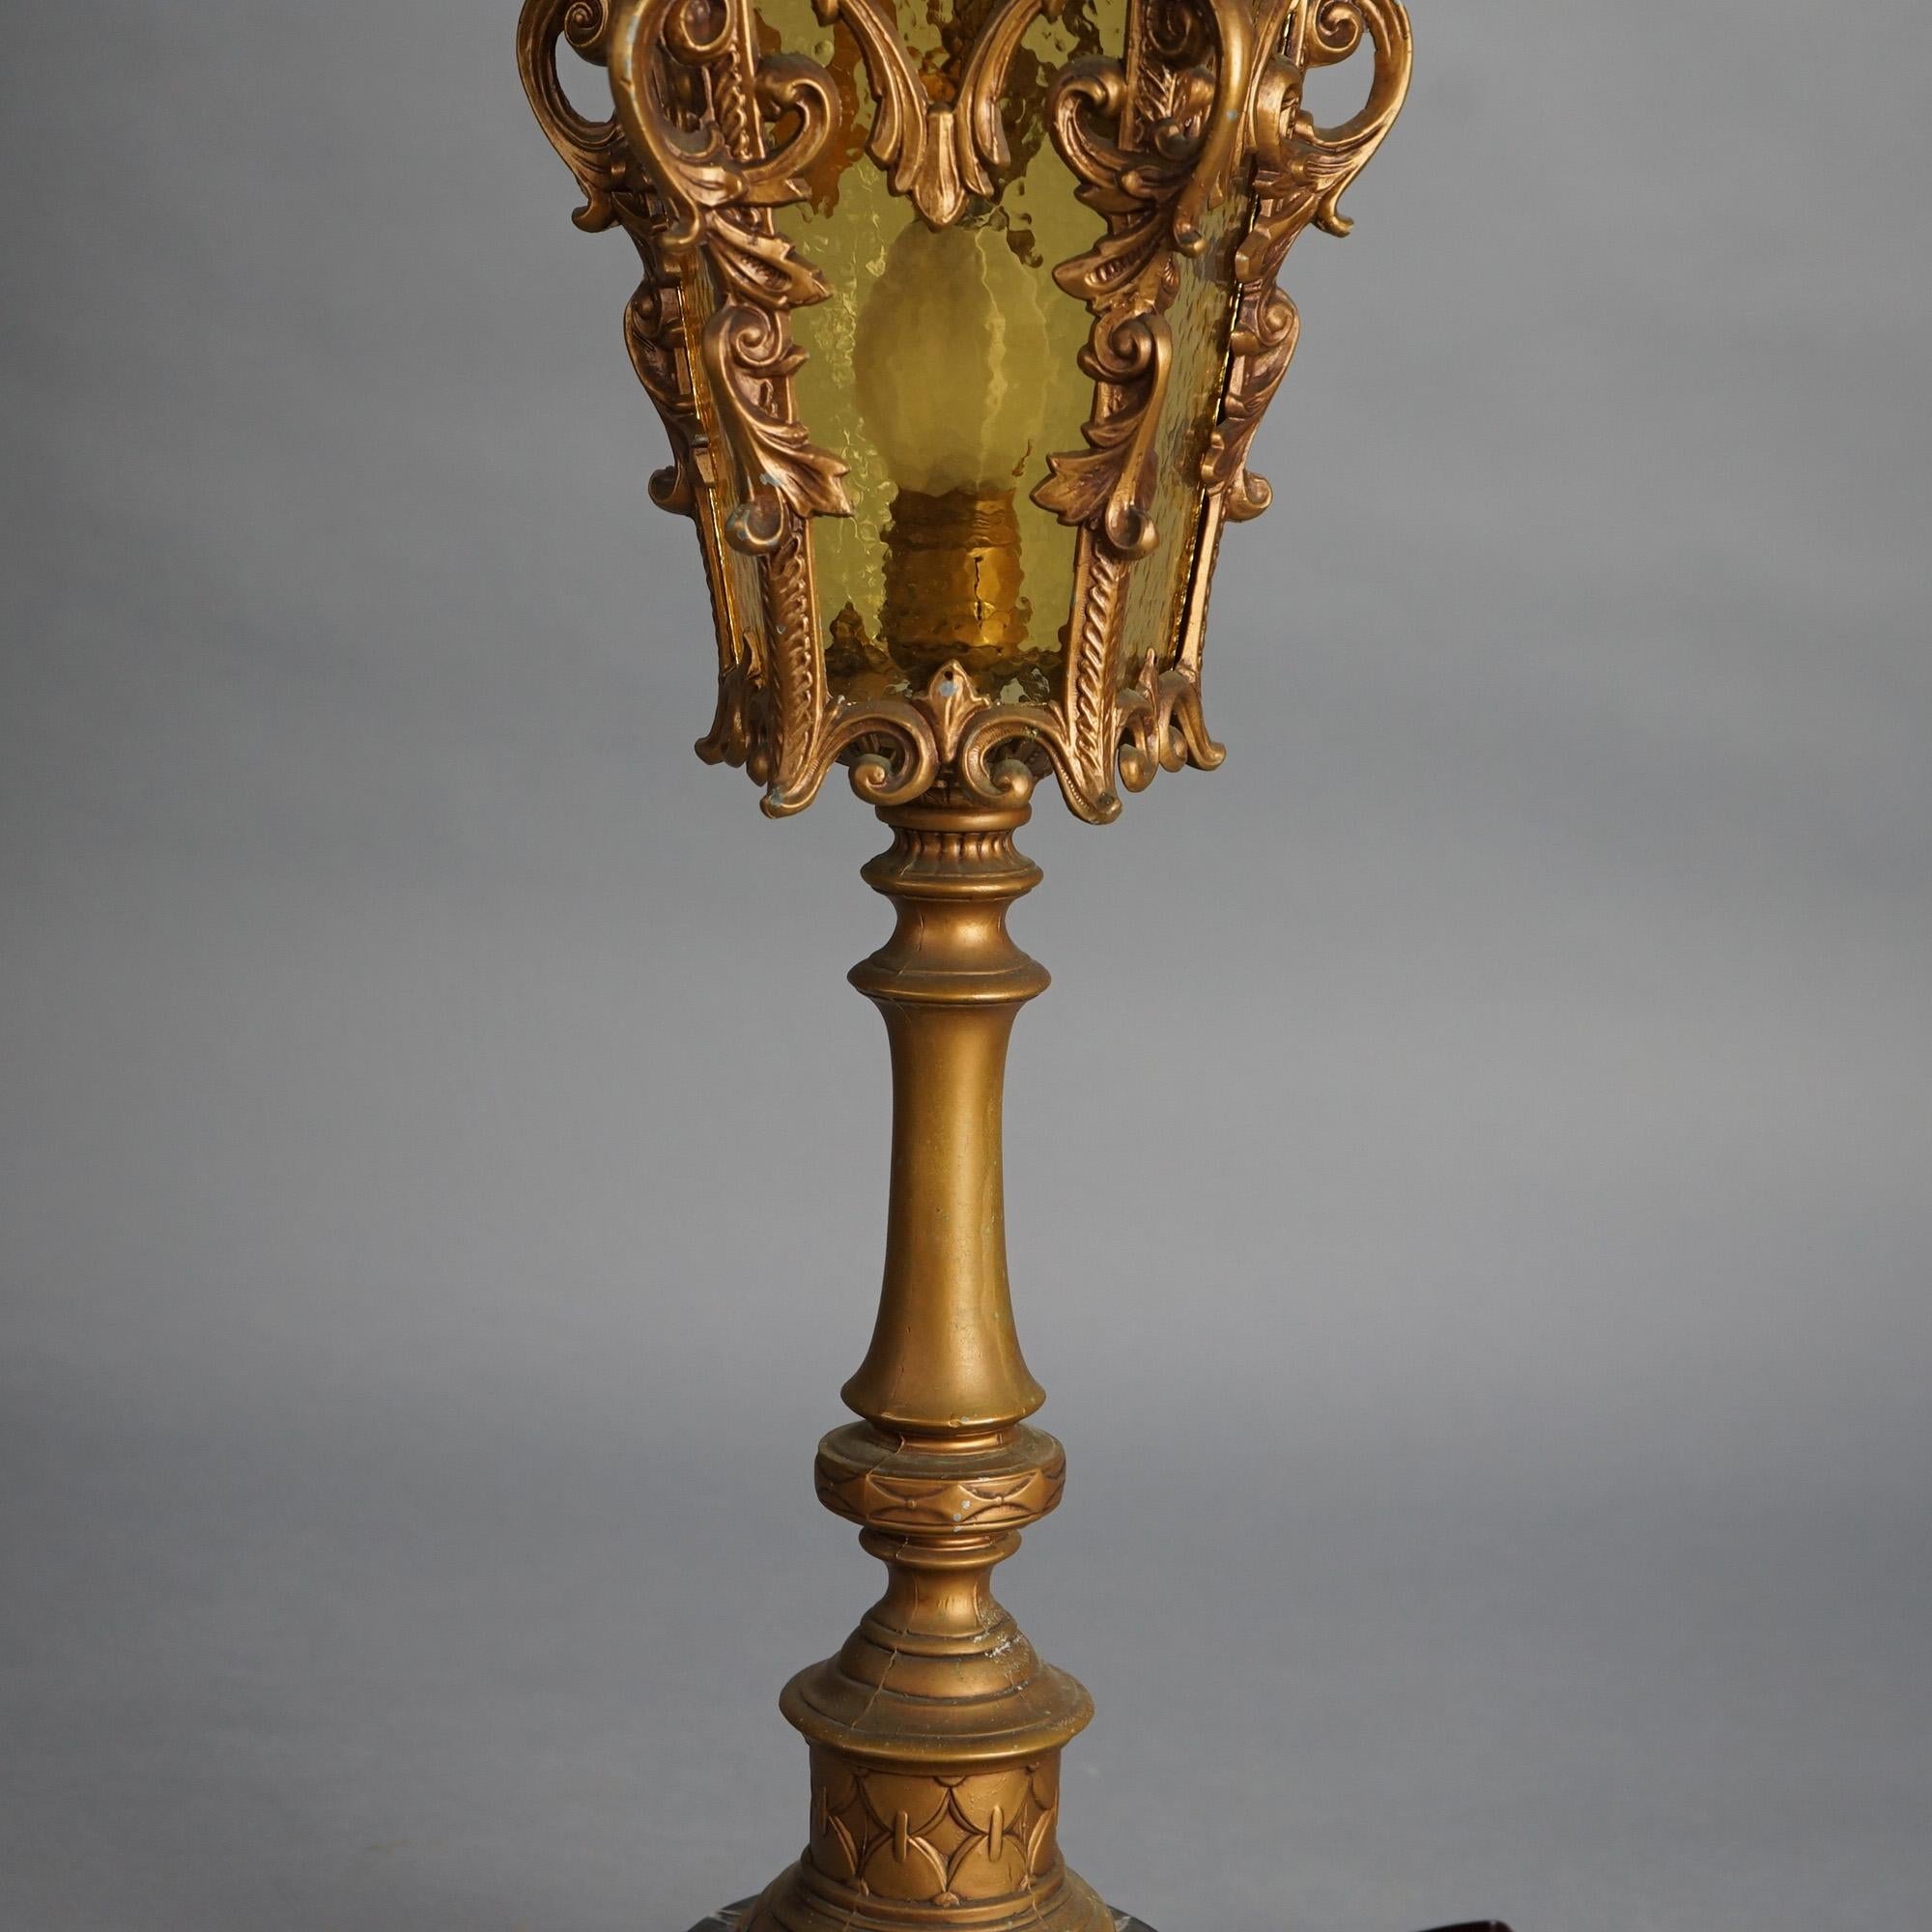 20th Century Antique Arts & Crafts Hammered Amber Glass Torchiere Table Lamp c1920 For Sale